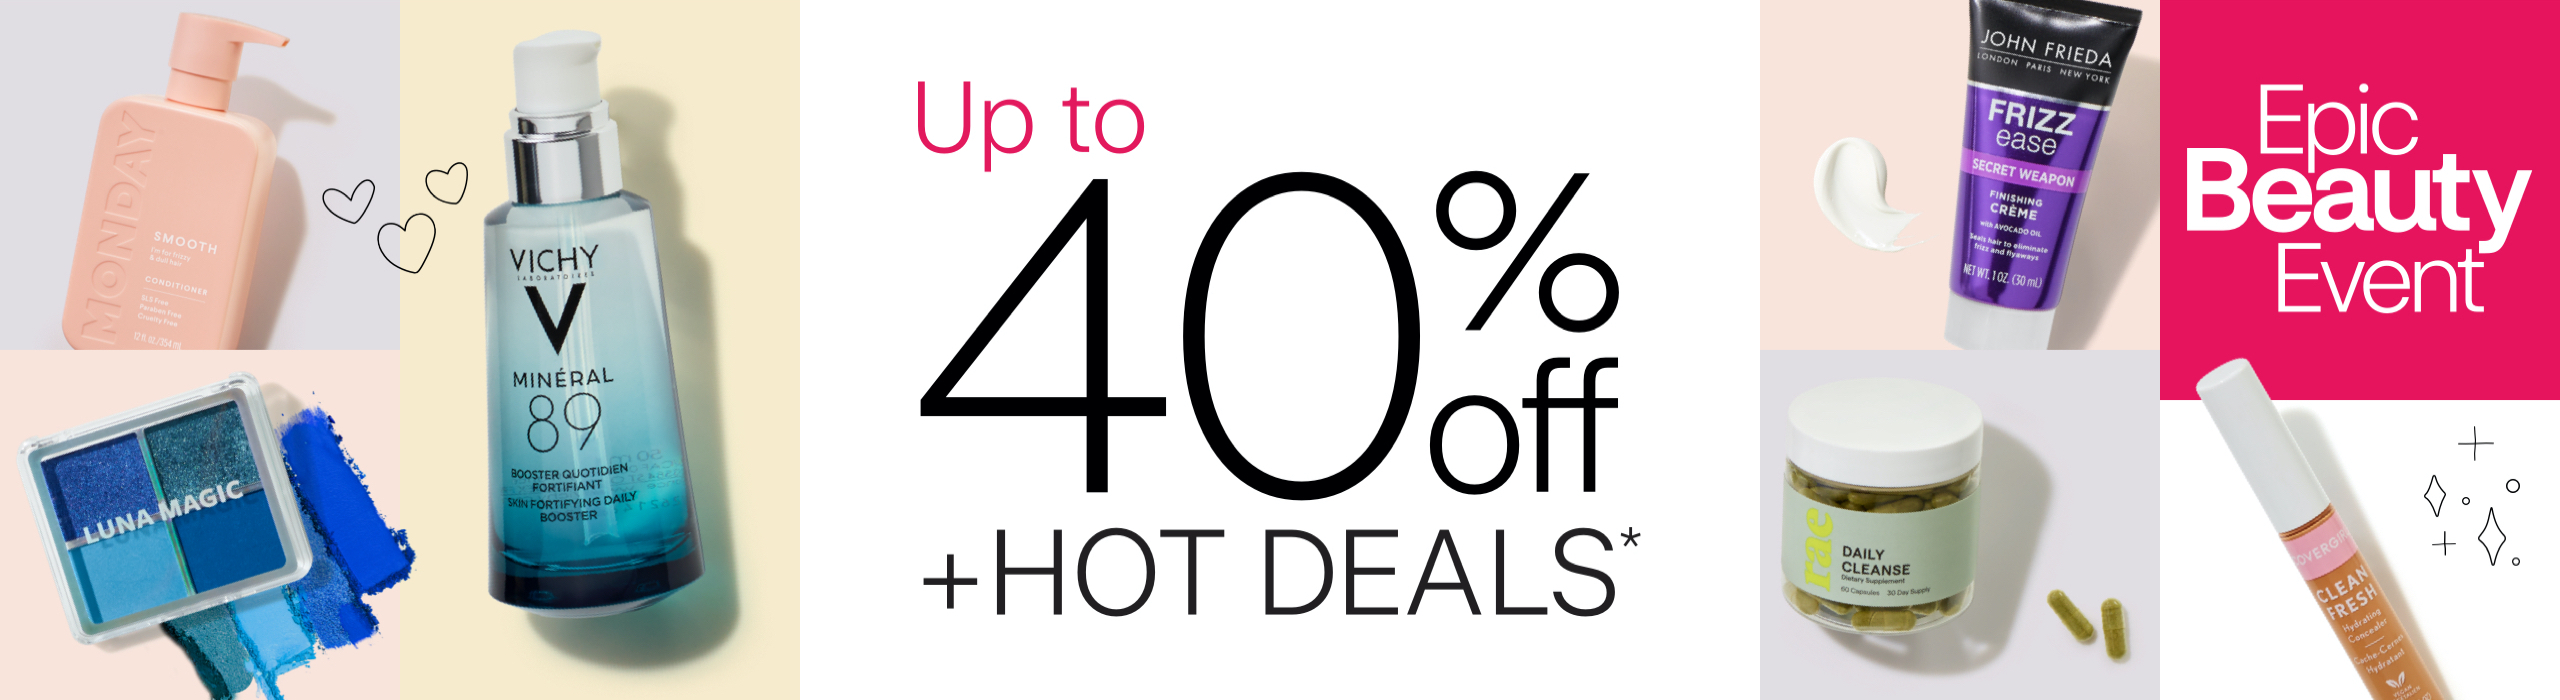 Save on brands like John Frieda, CoverGirl, Vichy, Monday and more.